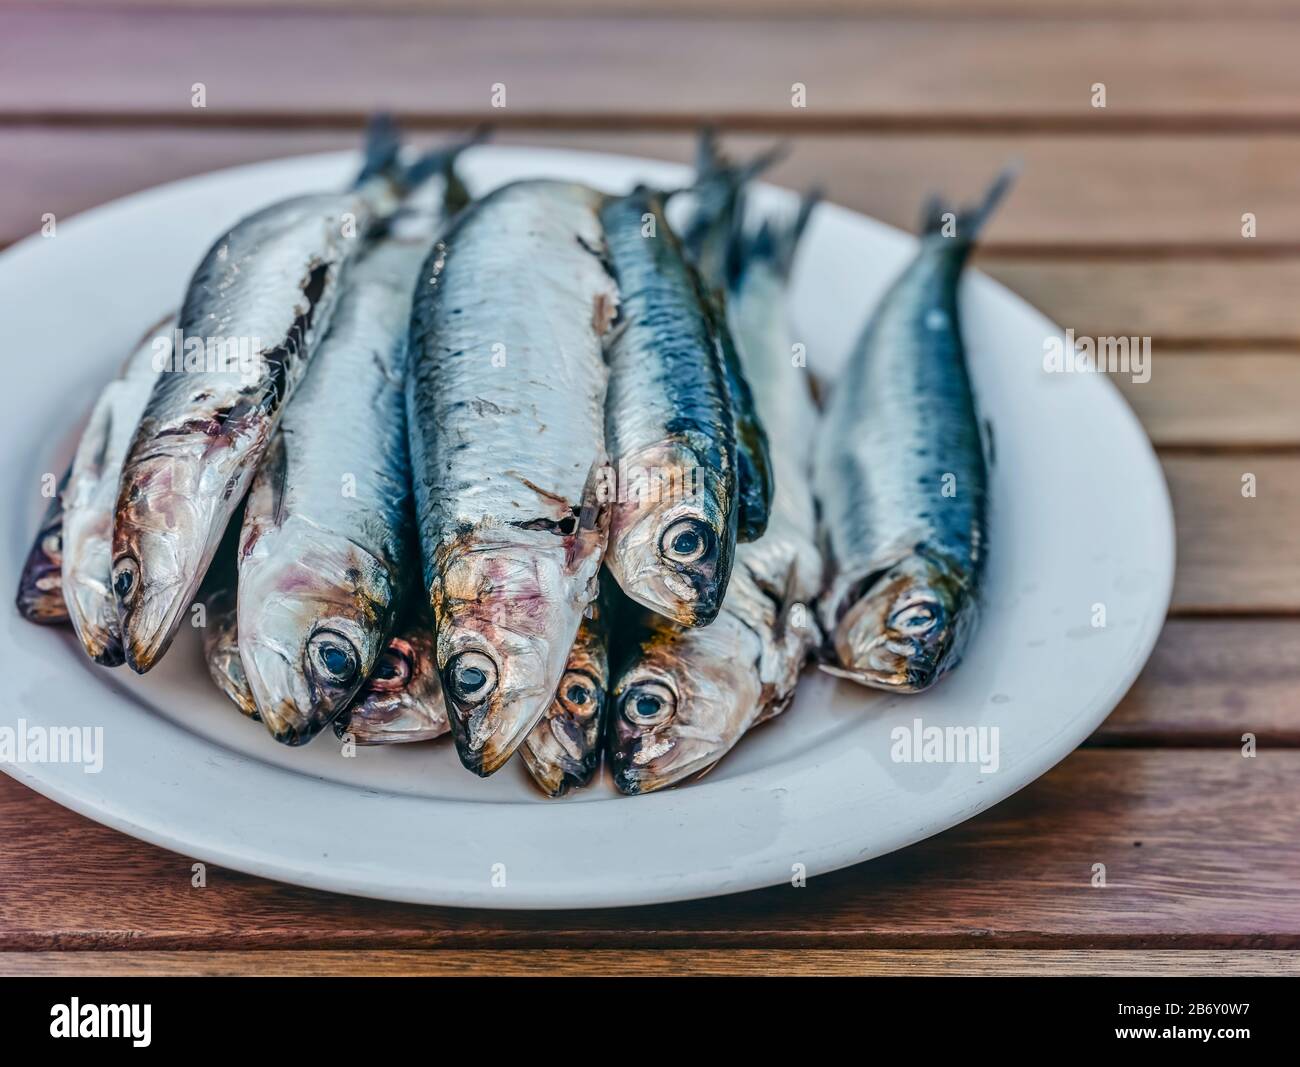 A plate of herrings and sardines ready on a Woden table ready for cooking  Stock Photo - Alamy